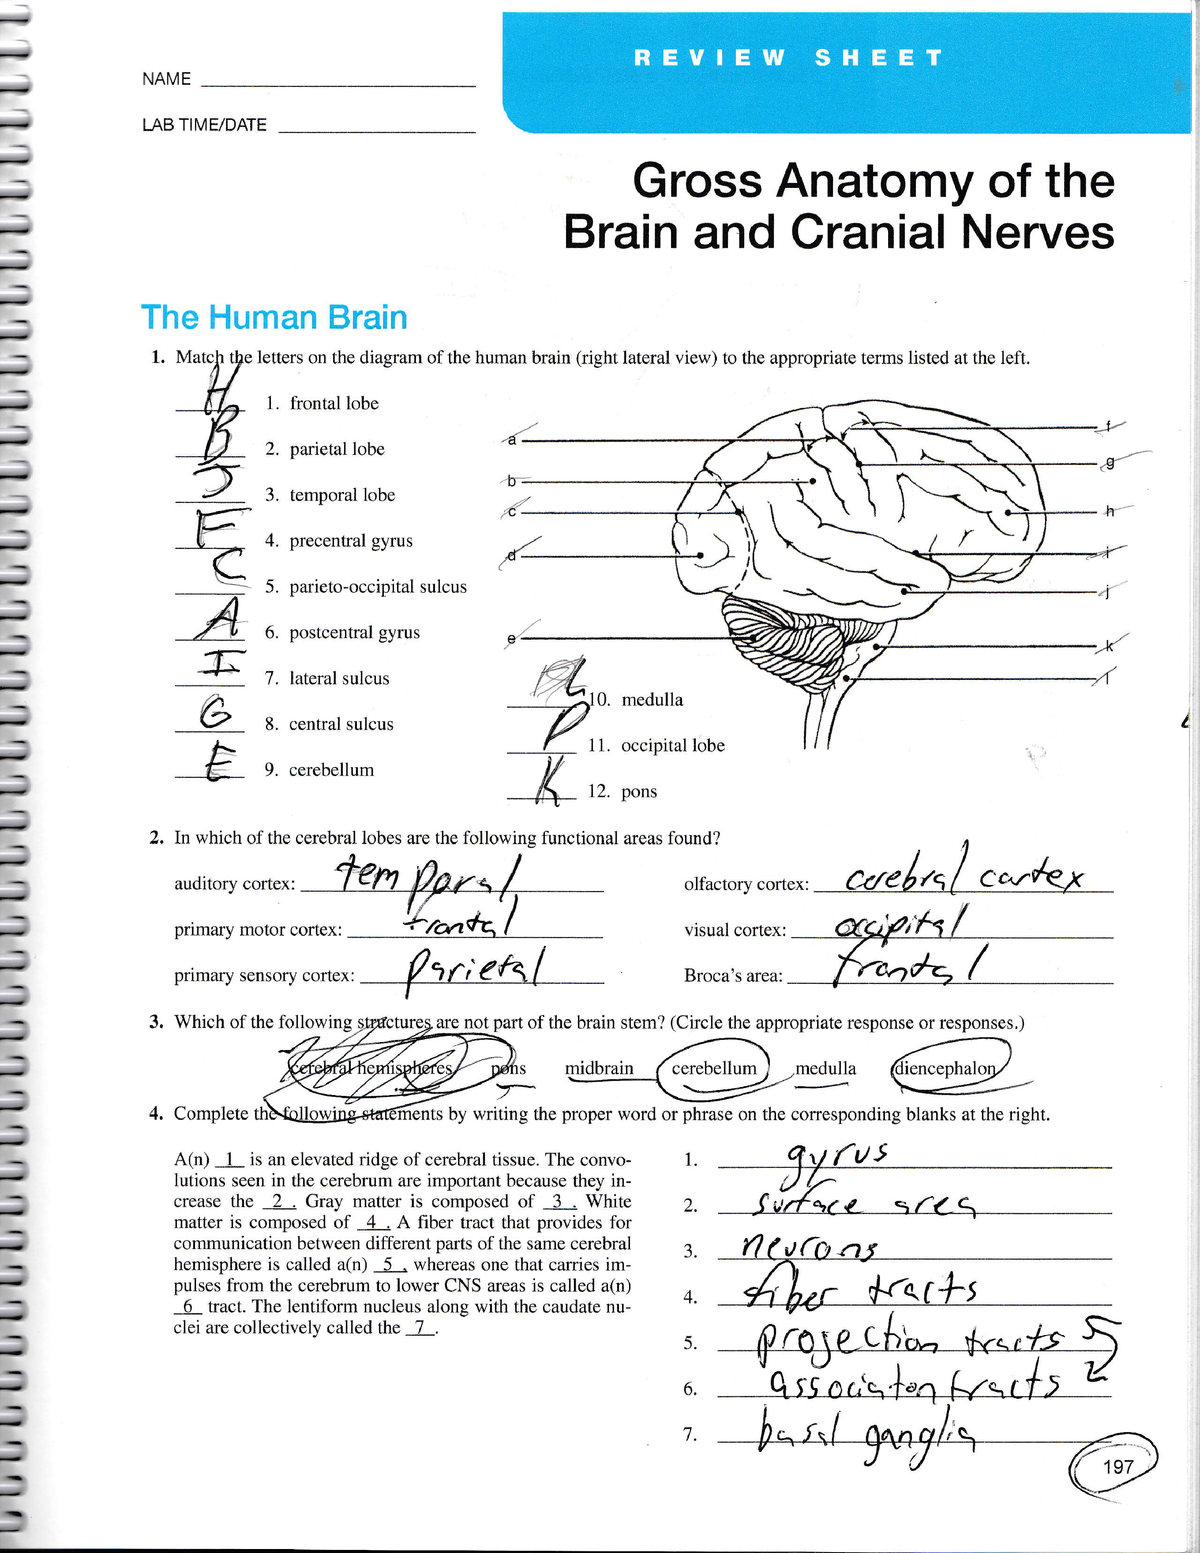 Gross Anatomy Of The Brain And Cranial Nerves Answers UNF StuDocu